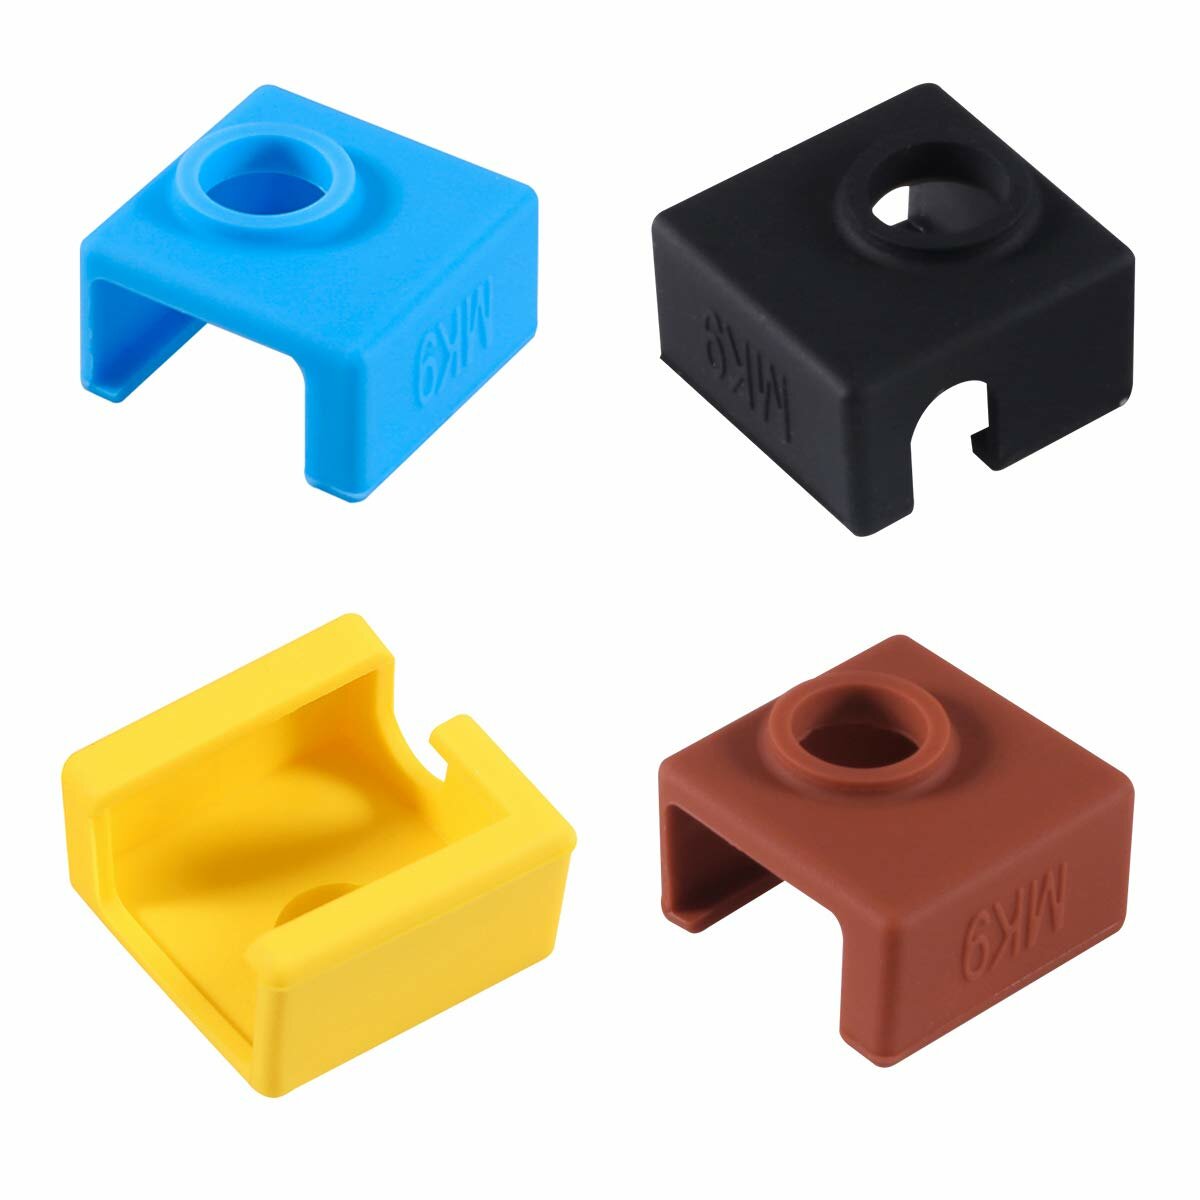 

SIMAX3D® 3Pcs Heating Block with Silicone Sock for MK7/8/9 3D Printer Hotend Extruder Ender 3/3 Pro CR-10/10S 3D Printer